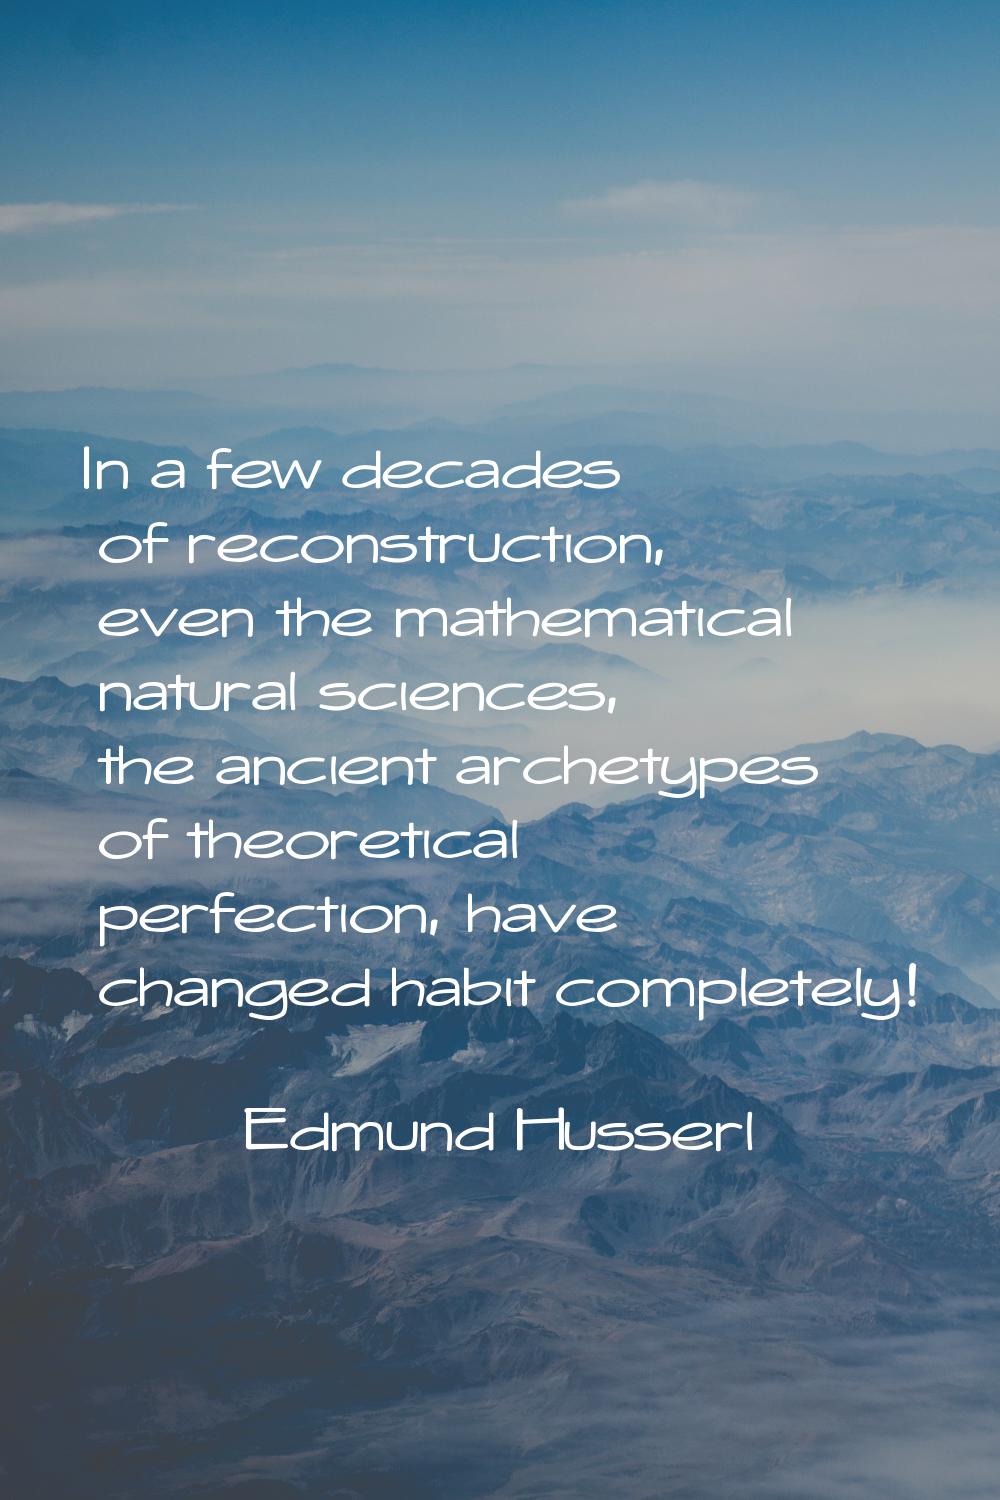 In a few decades of reconstruction, even the mathematical natural sciences, the ancient archetypes 